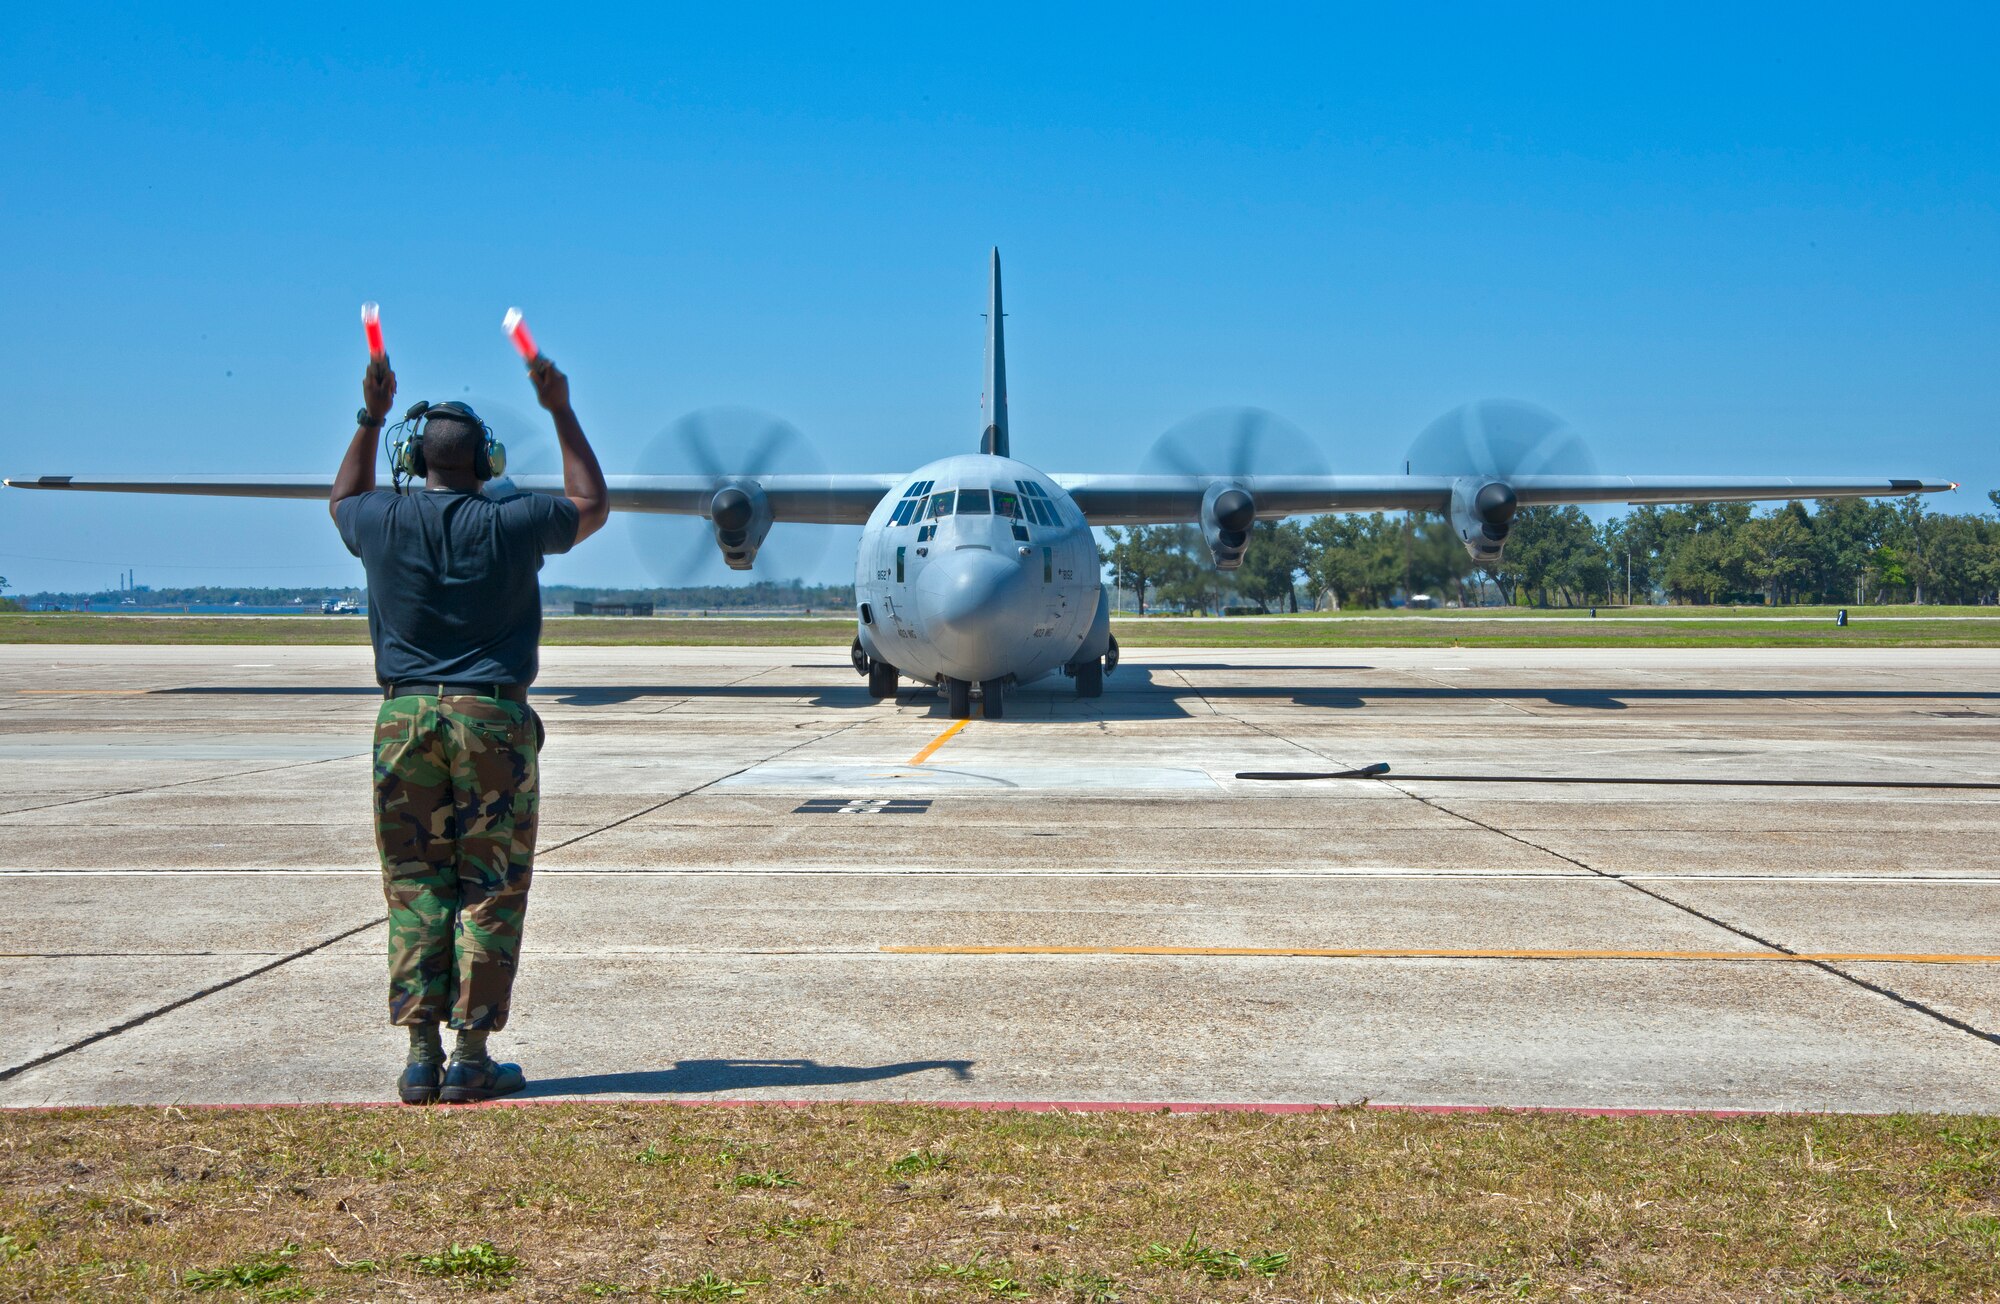 An 815th Airlift Squadron C-130J-30 returns to the 403rd Wing, Keesler Air Force Base, Miss., from Southwest Asia March 21.  Reservists from the 403rd Wing deployed in January 2011 to support overseas contingency operations there.  (U.S. Air Force photo by Tech. Sgt. Tanya King)